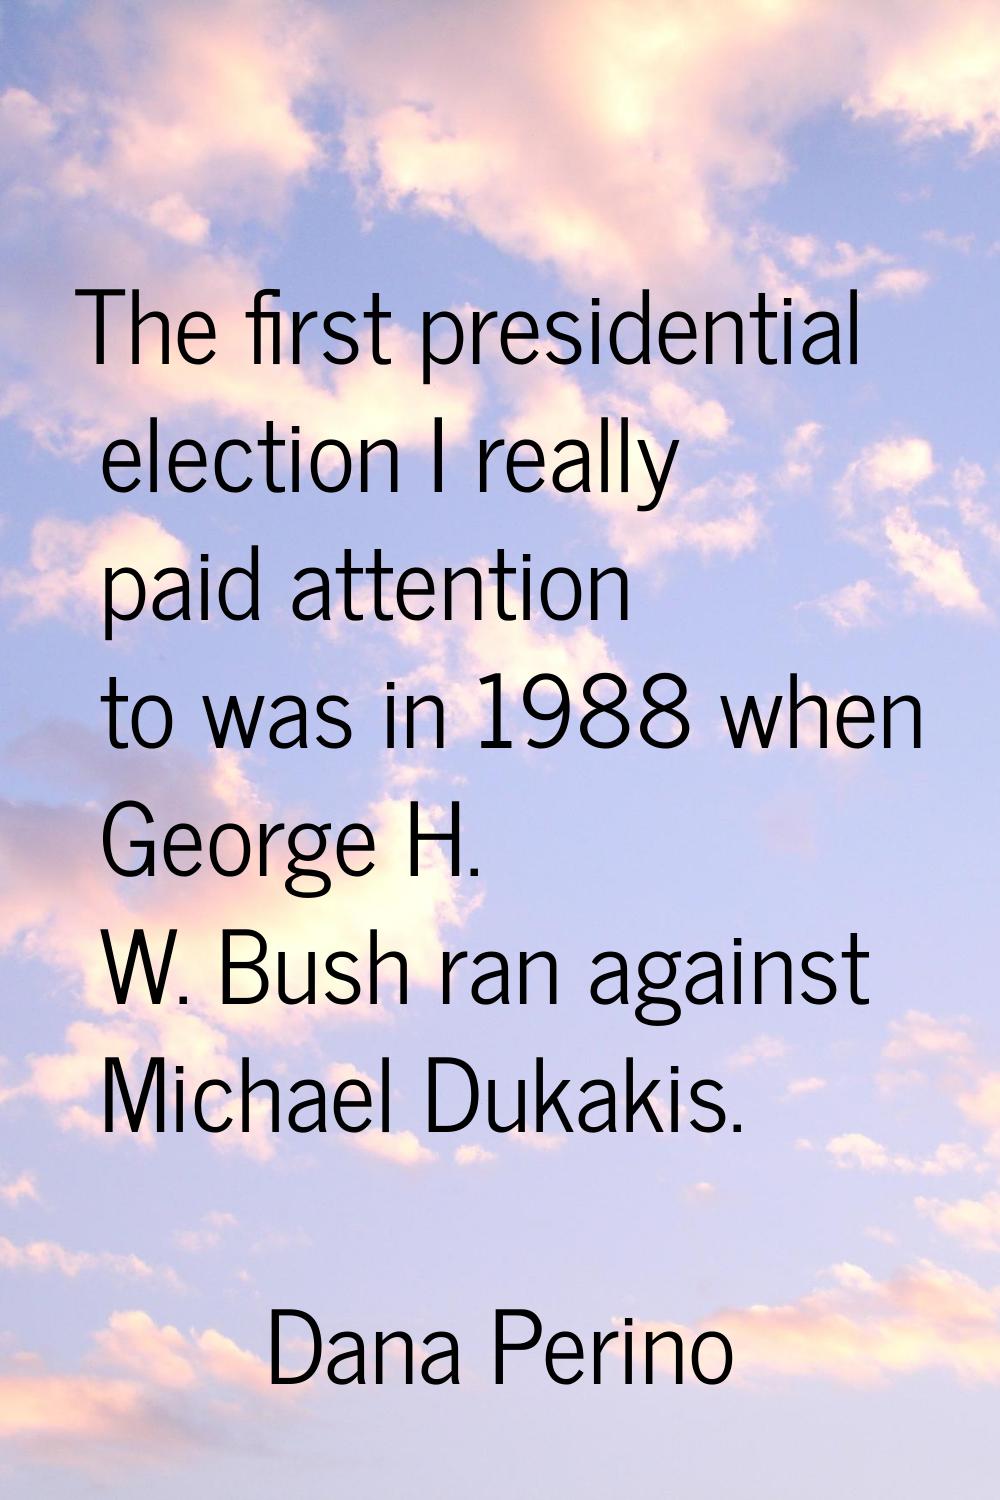 The first presidential election I really paid attention to was in 1988 when George H. W. Bush ran a